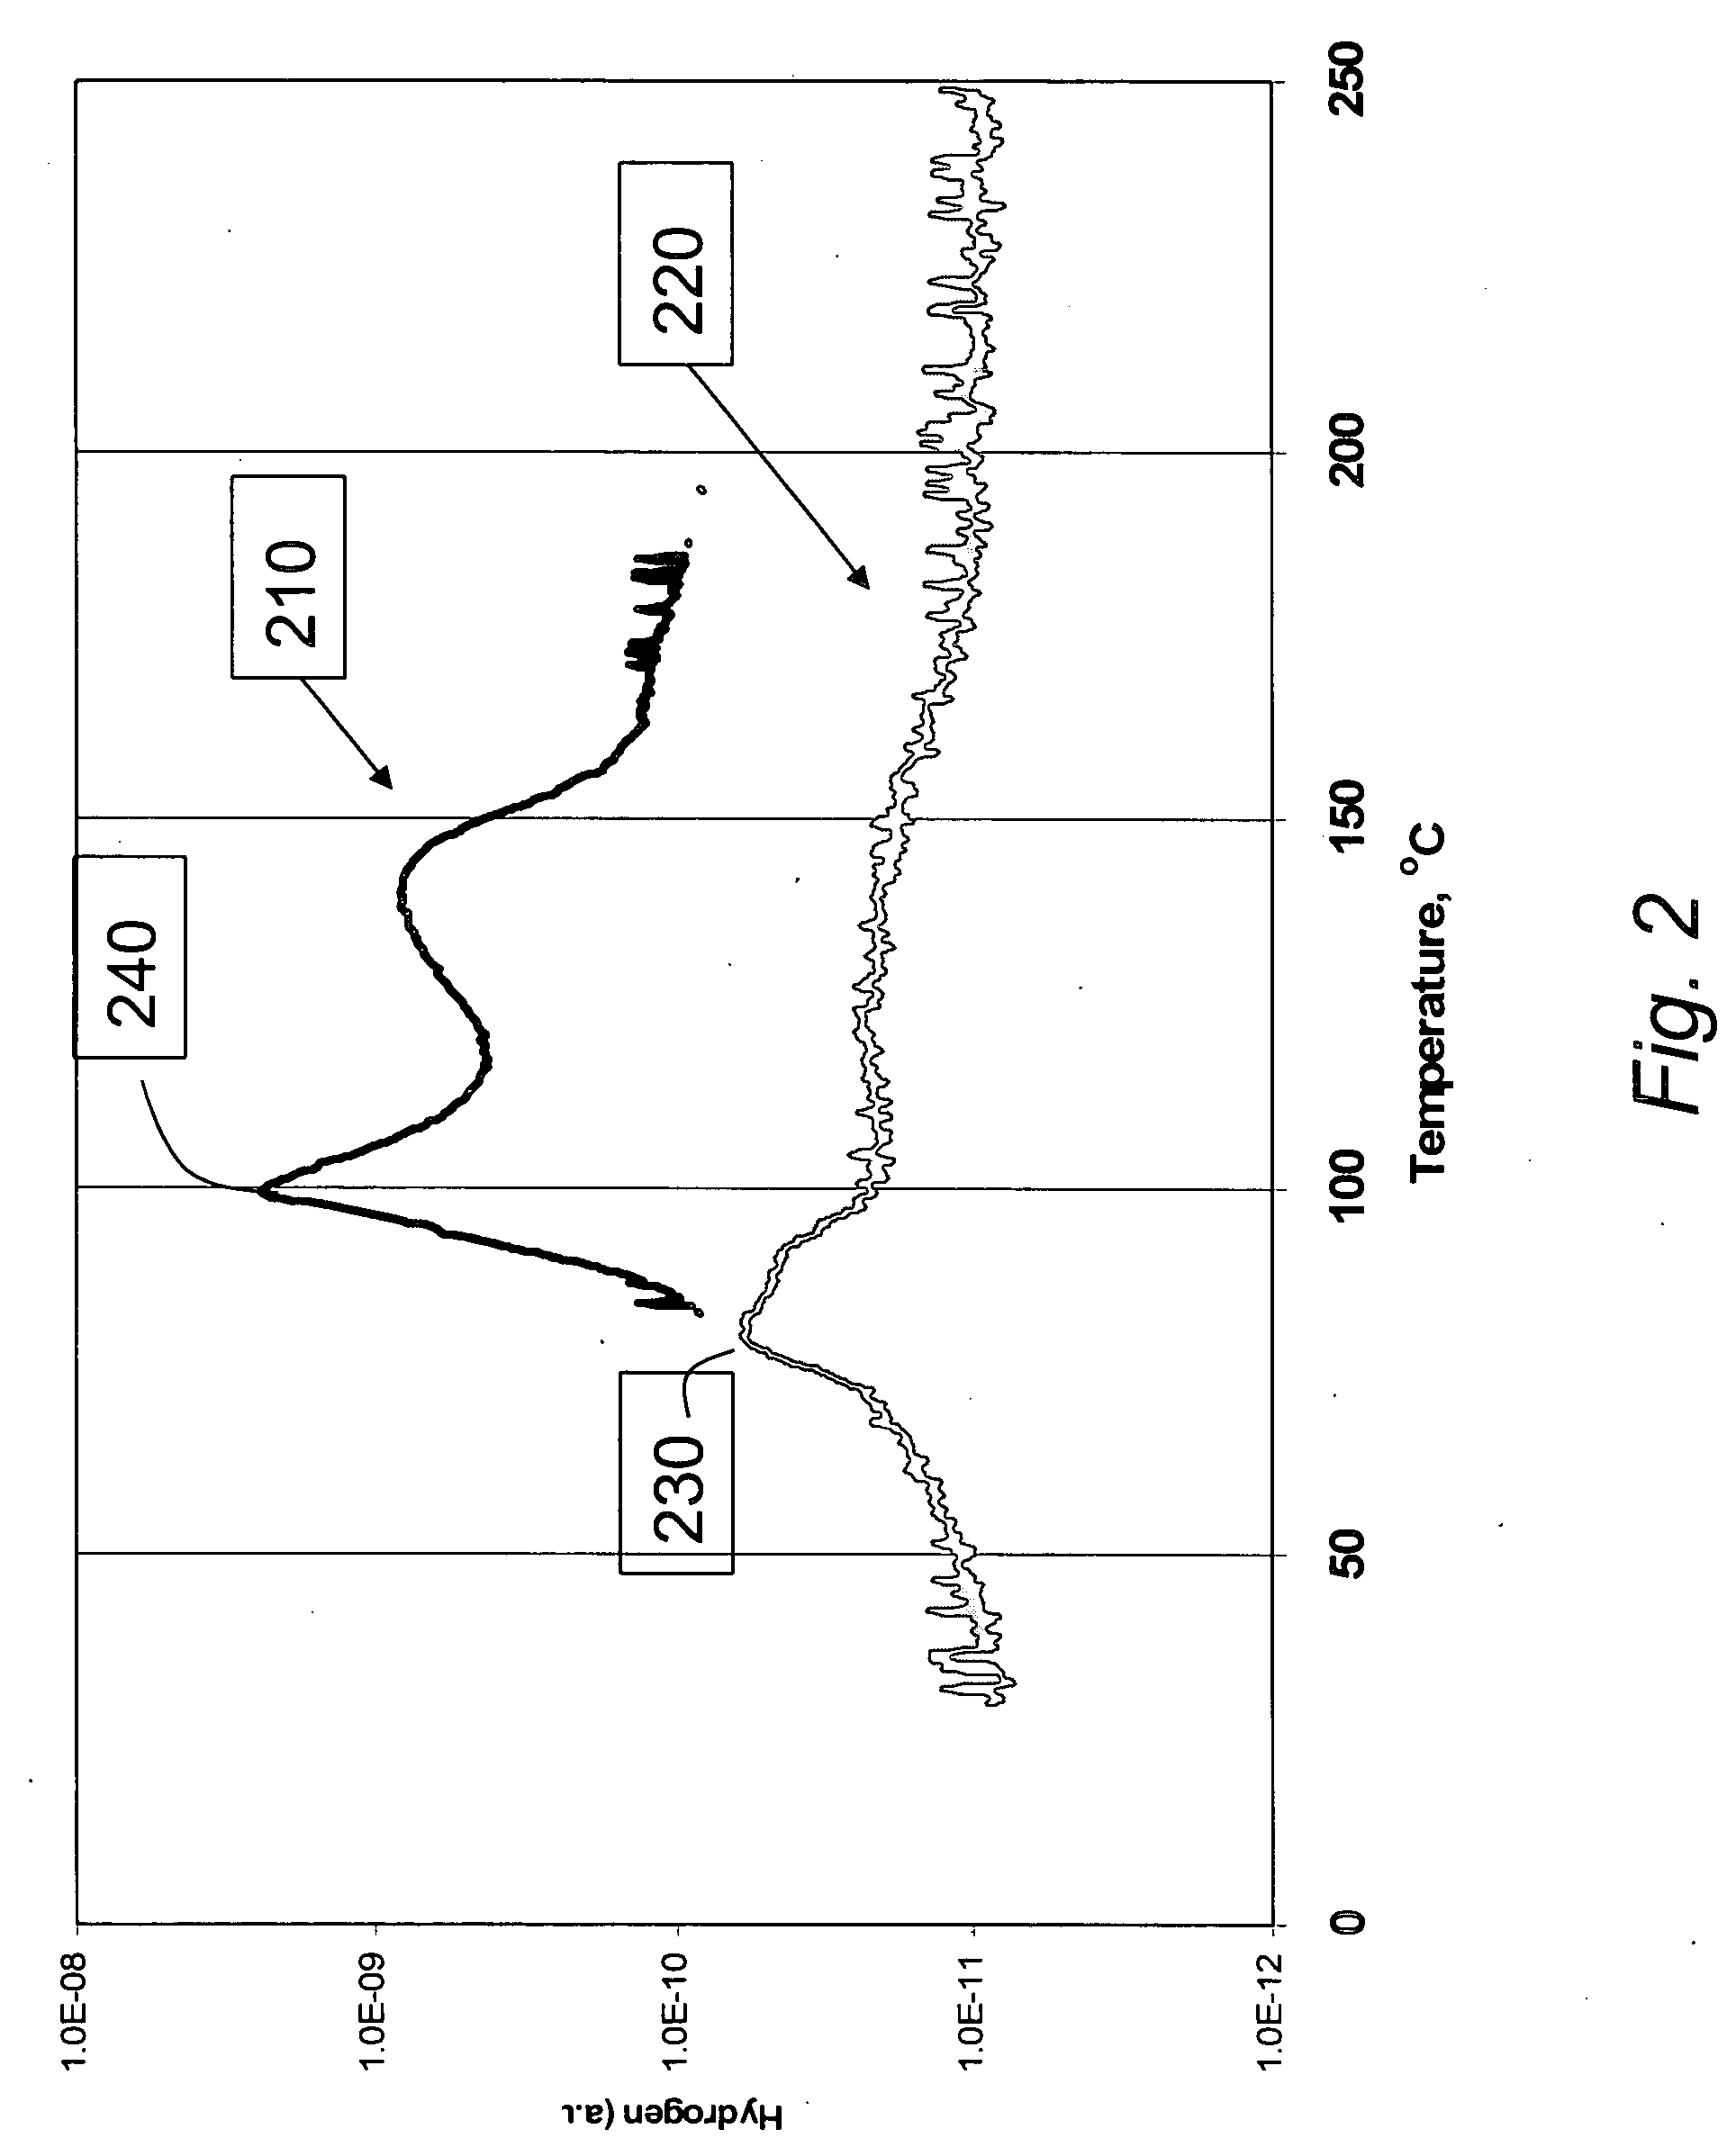 Materials for hydrogen storage and methods for preparing and using same